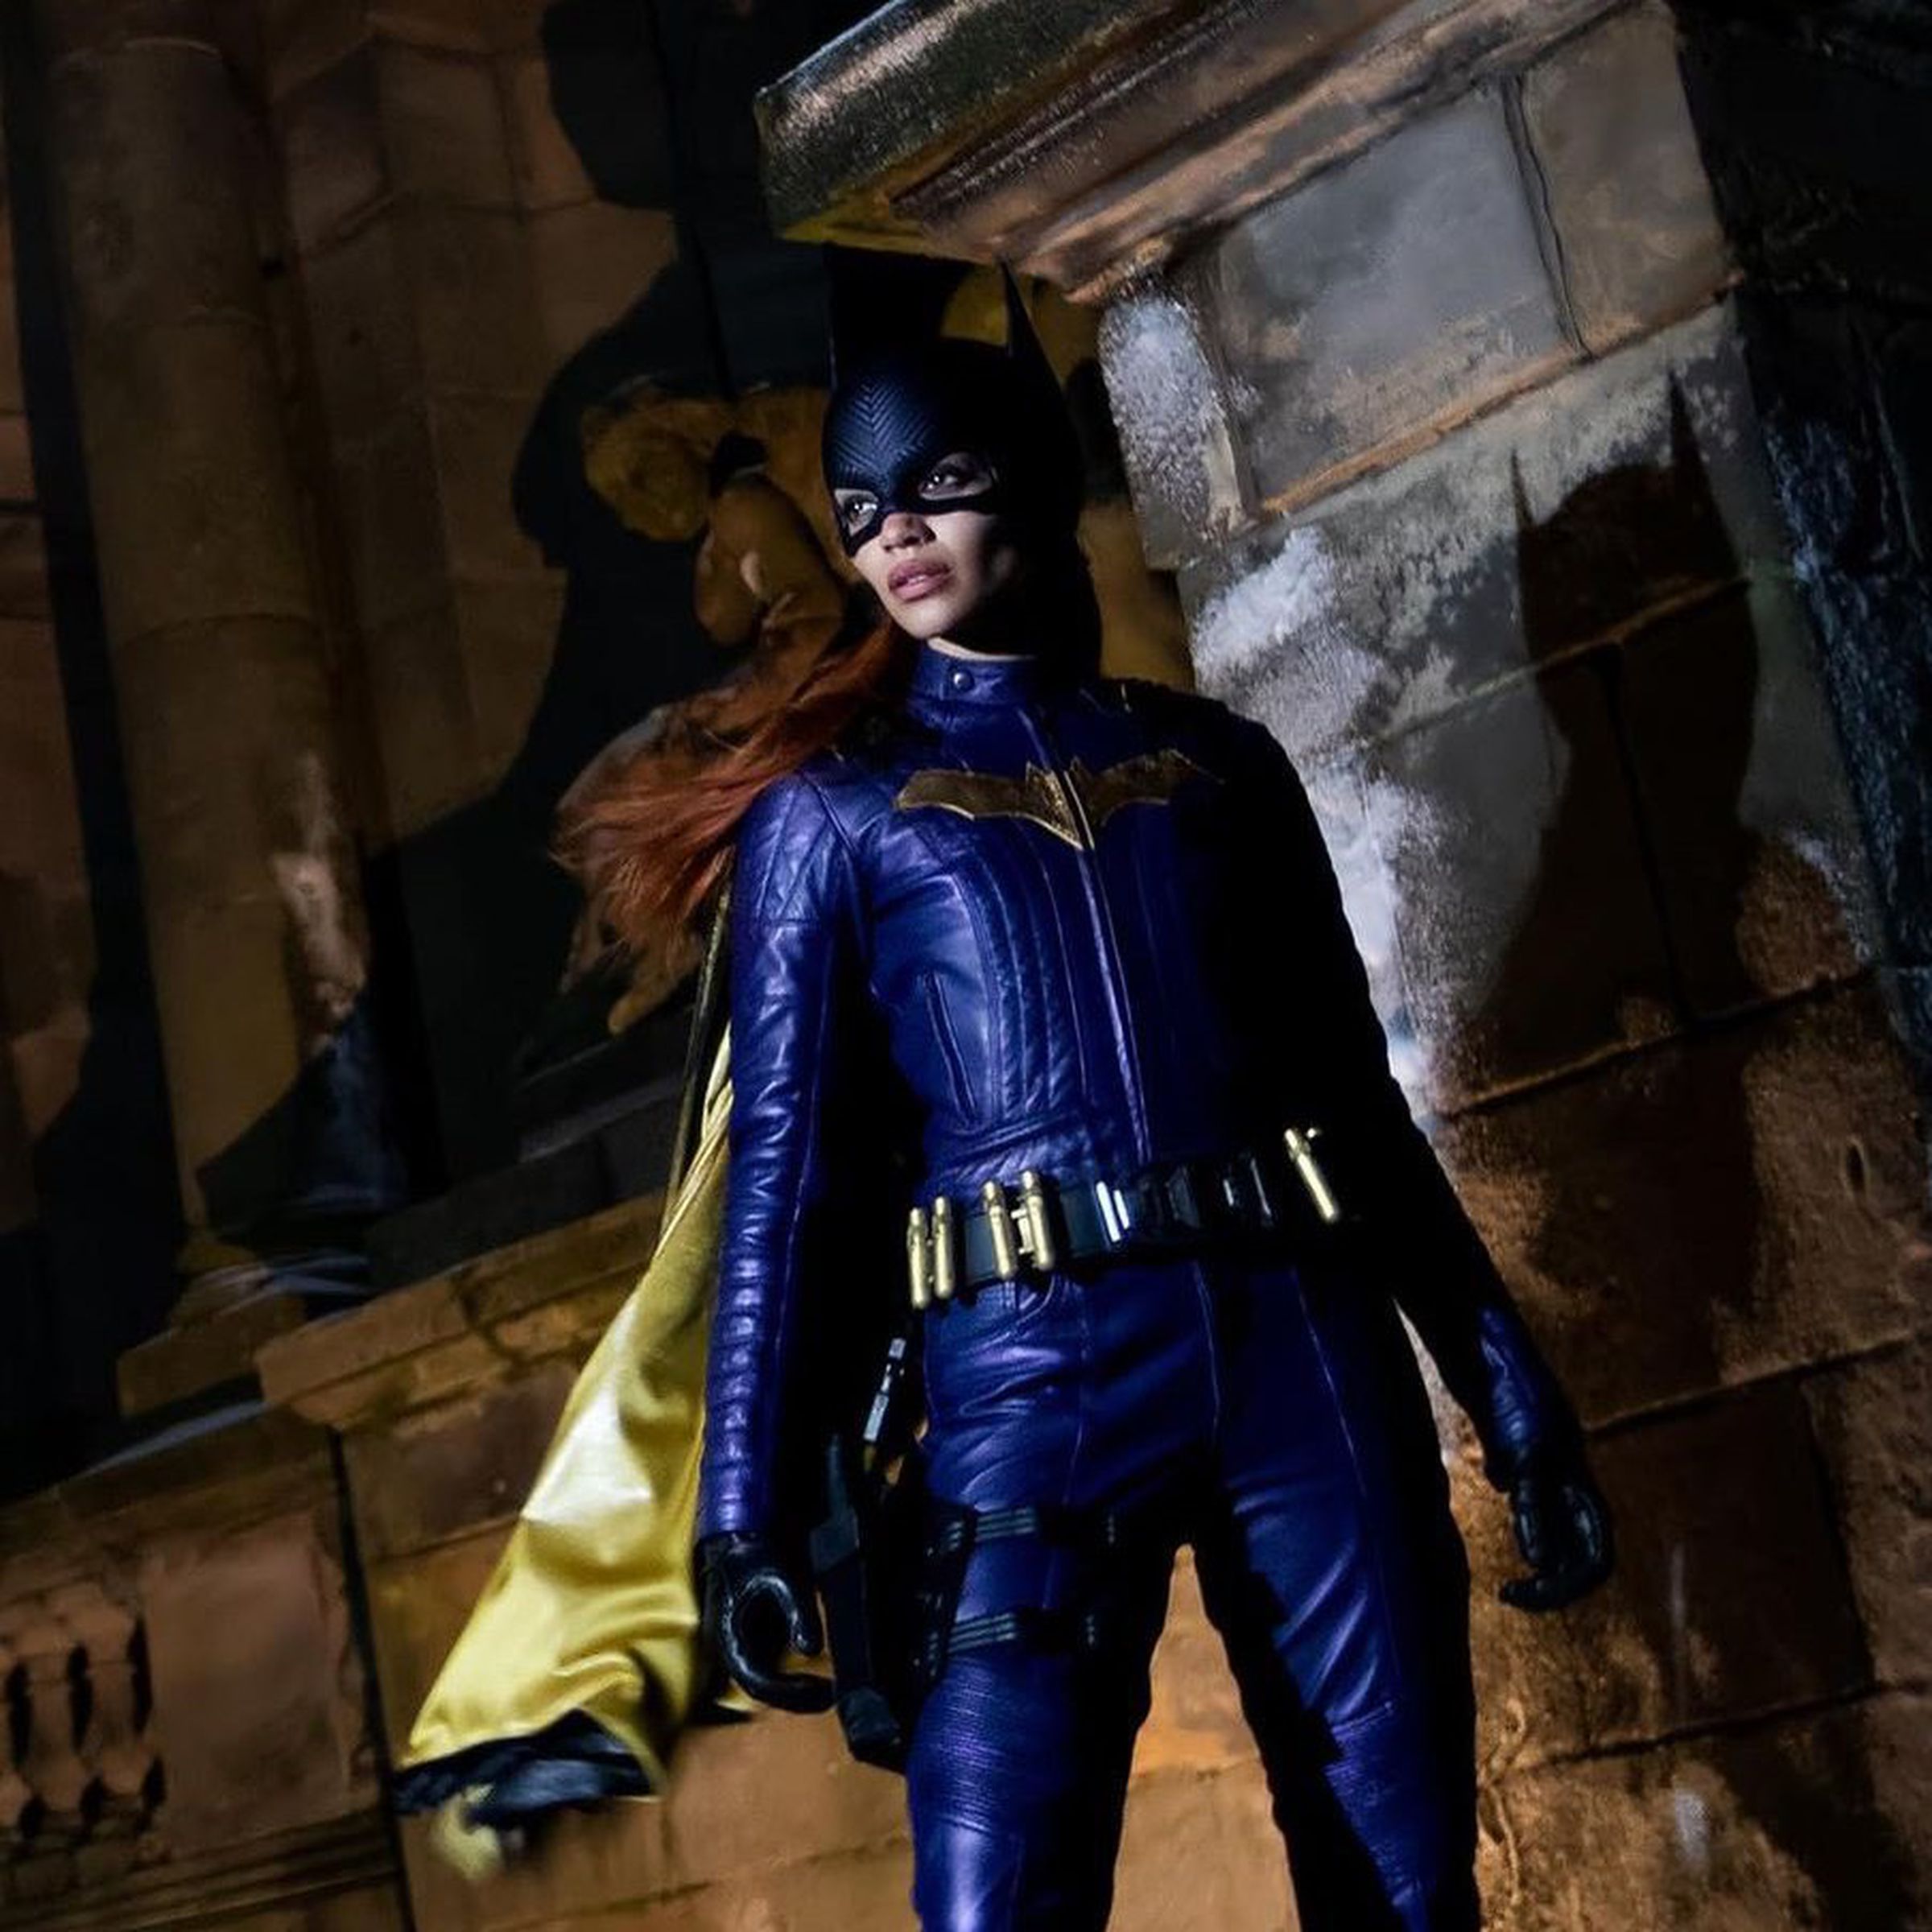 Leslie Grace is wearing a red wig and a purple Batgirl costume and mask. She appears to be standing on a rooftop.